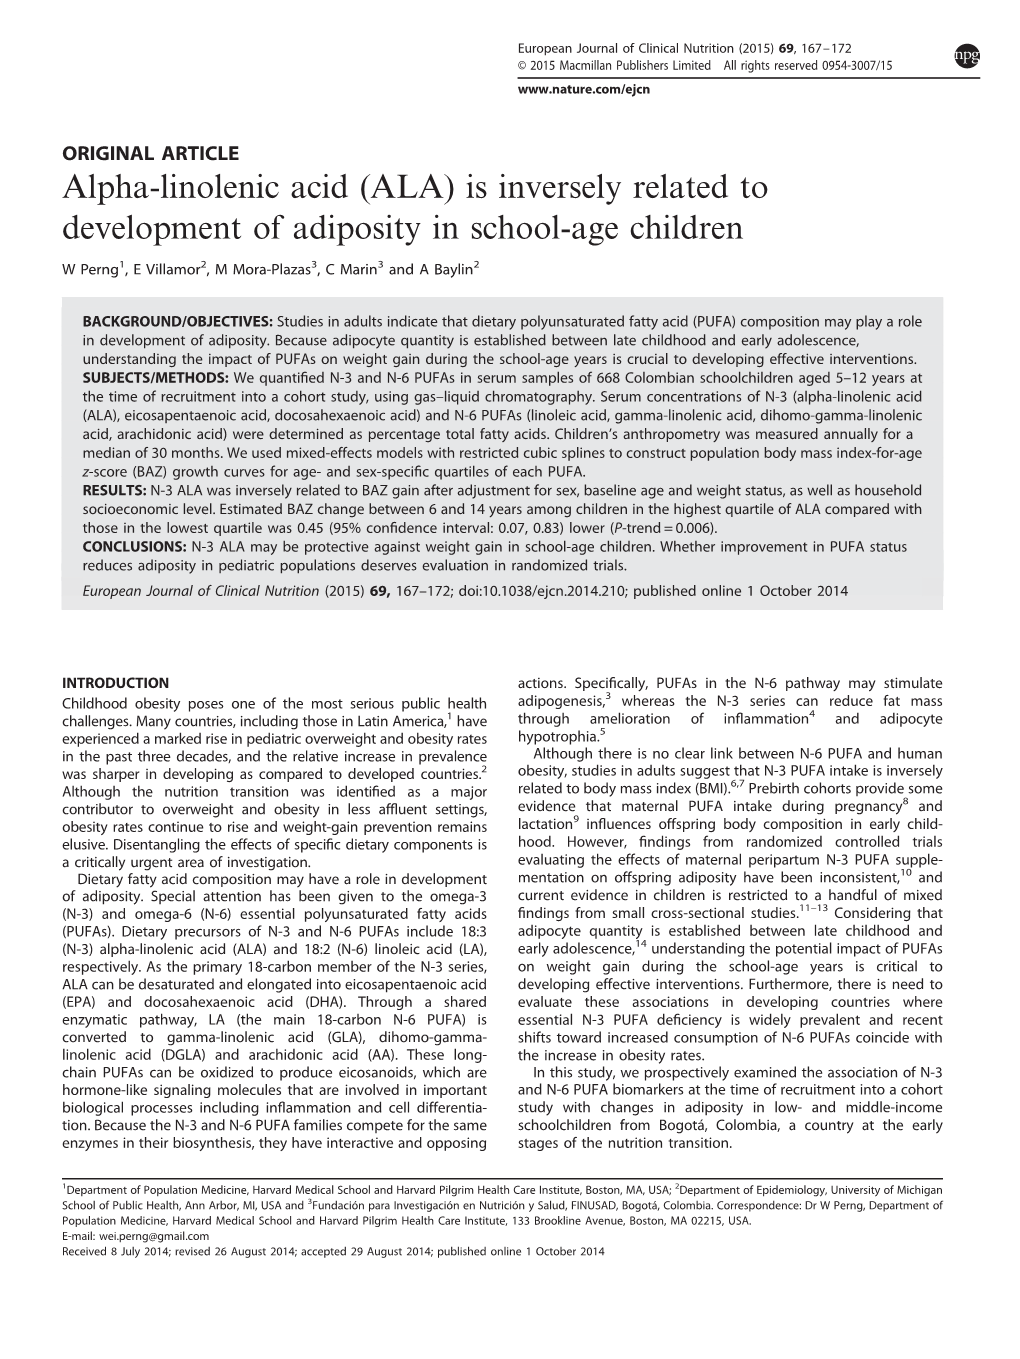 Alpha-Linolenic Acid (ALA) Is Inversely Related to Development of Adiposity in School-Age Children